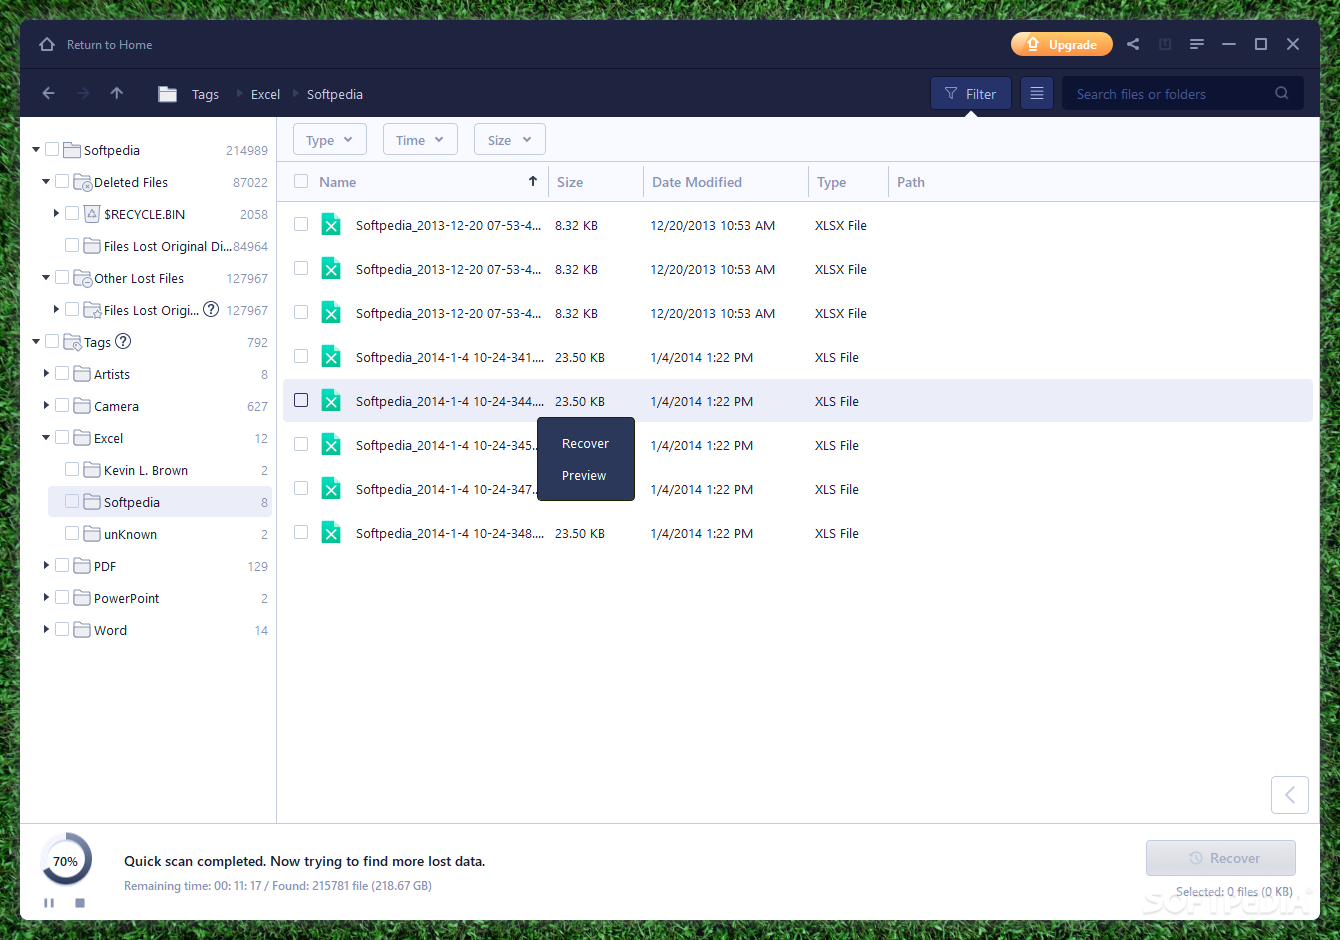 email backup wizard free download